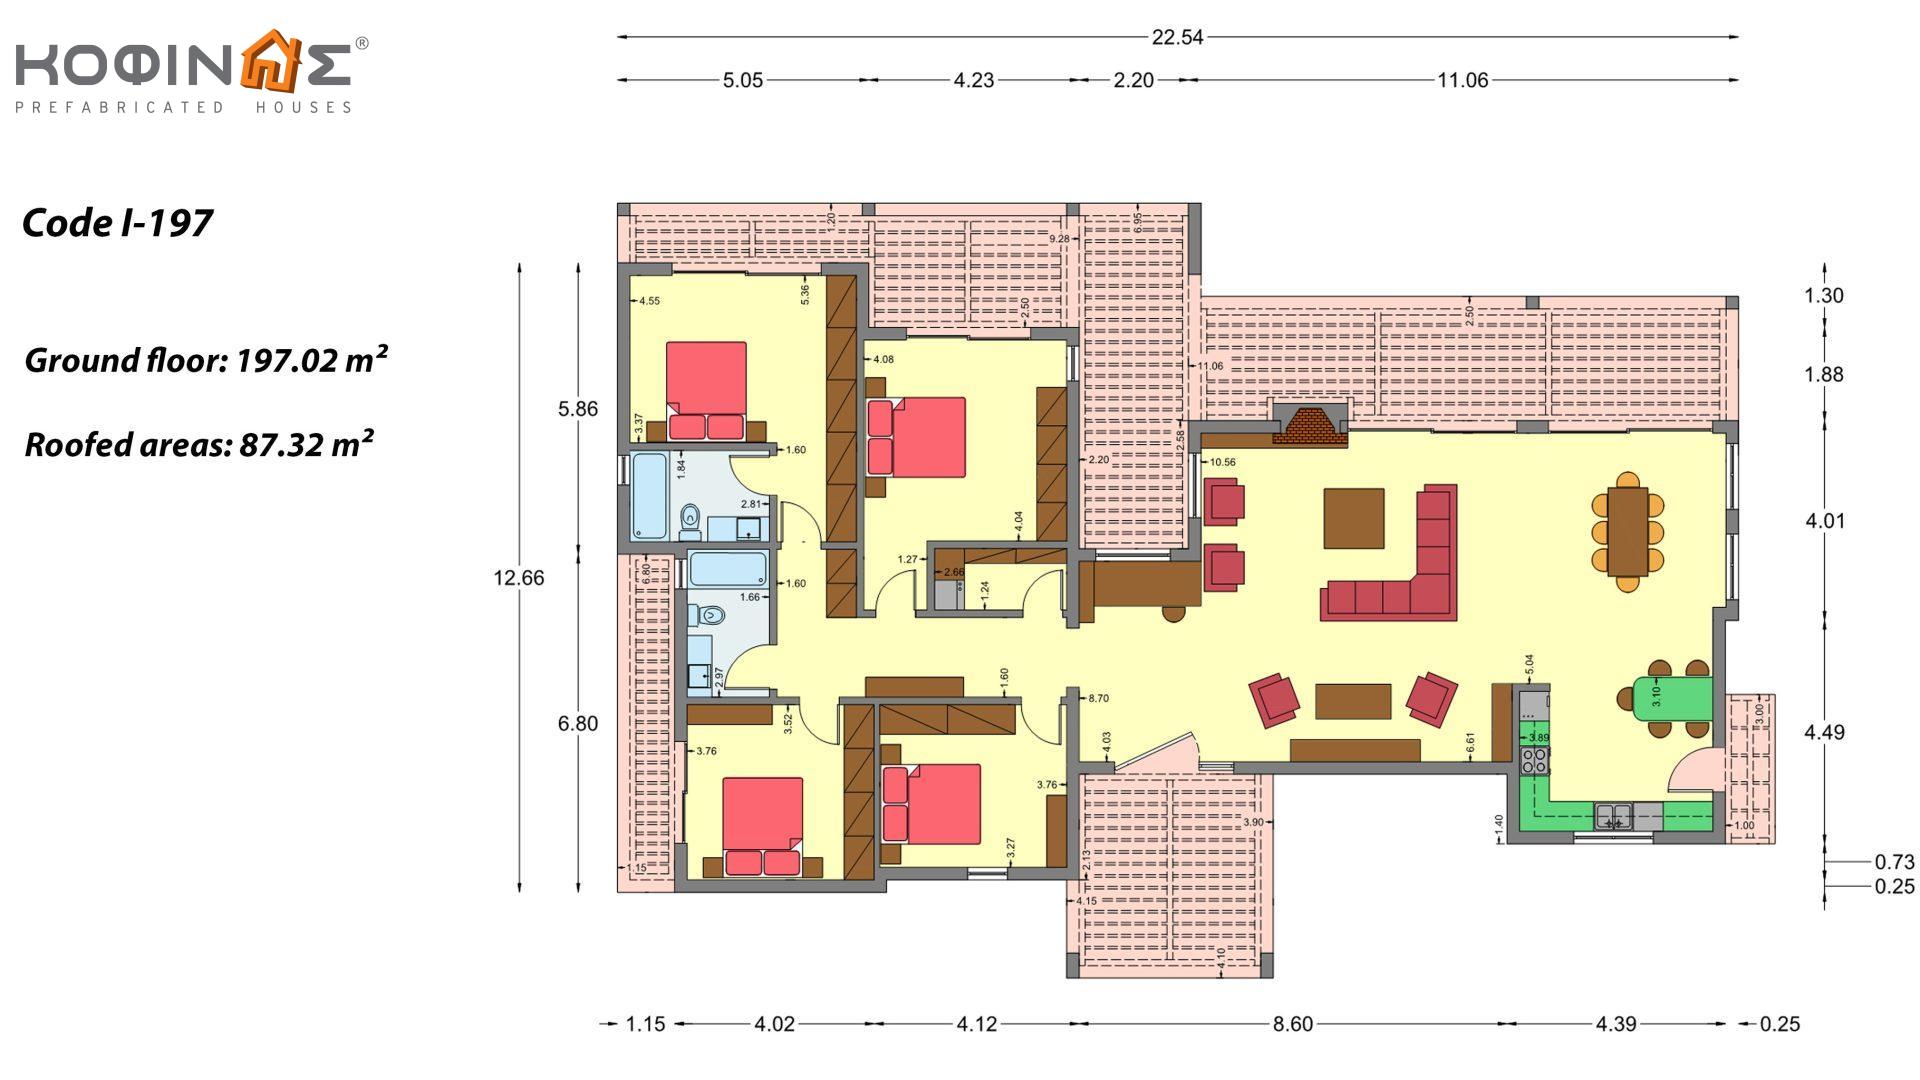 1-story house Ι-197, total surface of 197.02 m², roofed areas 87,32 m²